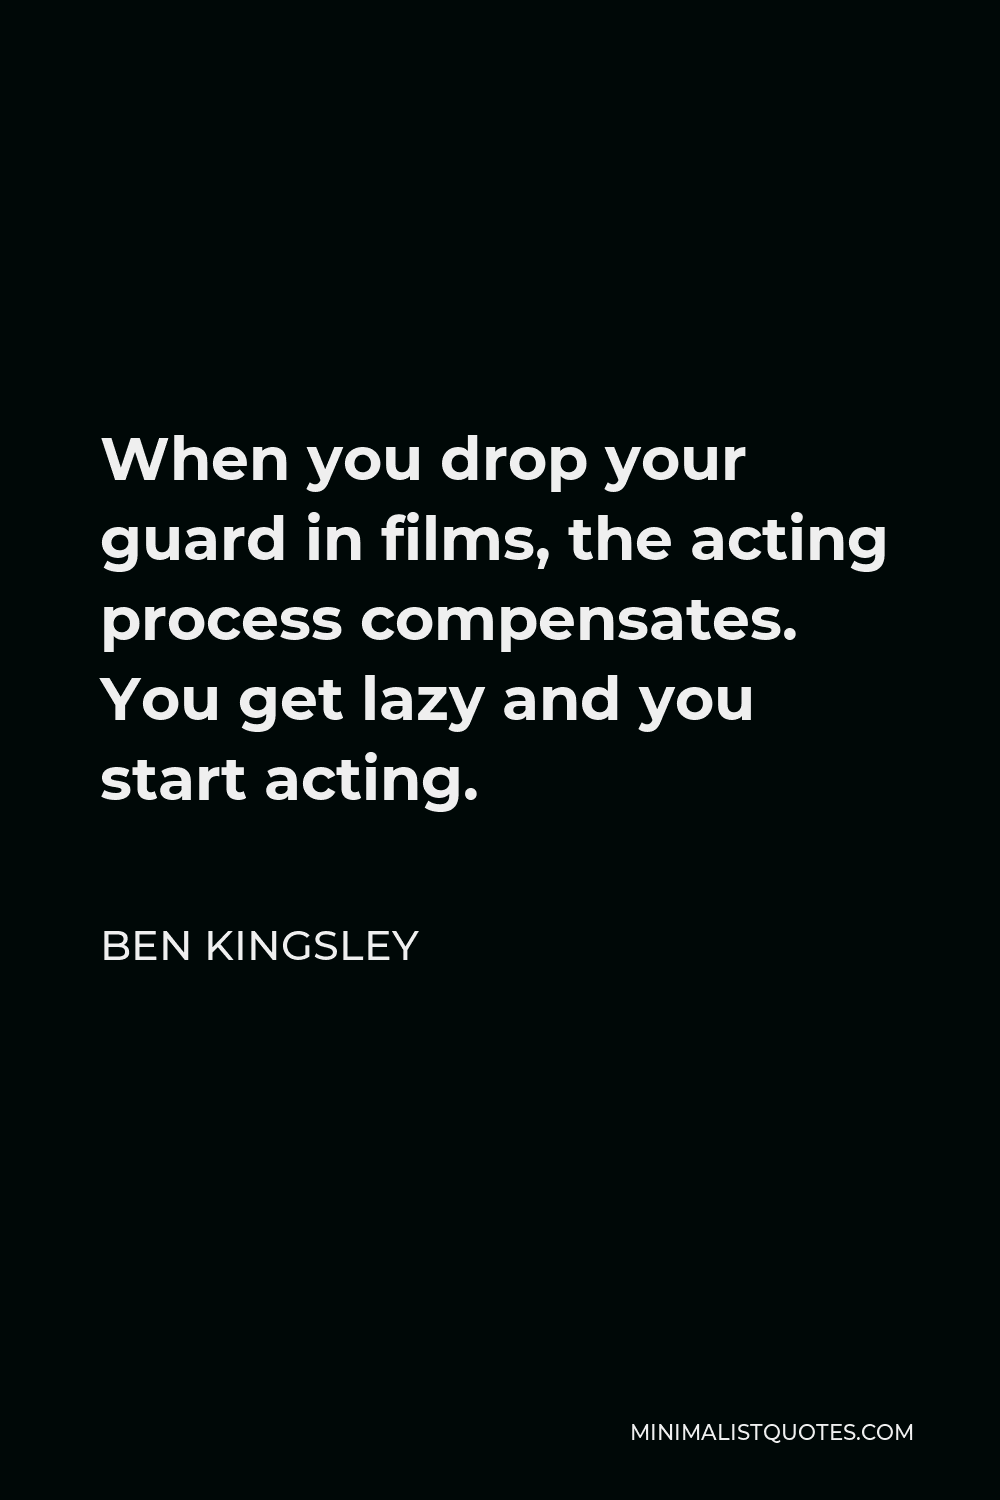 Ben Kingsley Quote - When you drop your guard in films, the acting process compensates. You get lazy and you start acting.